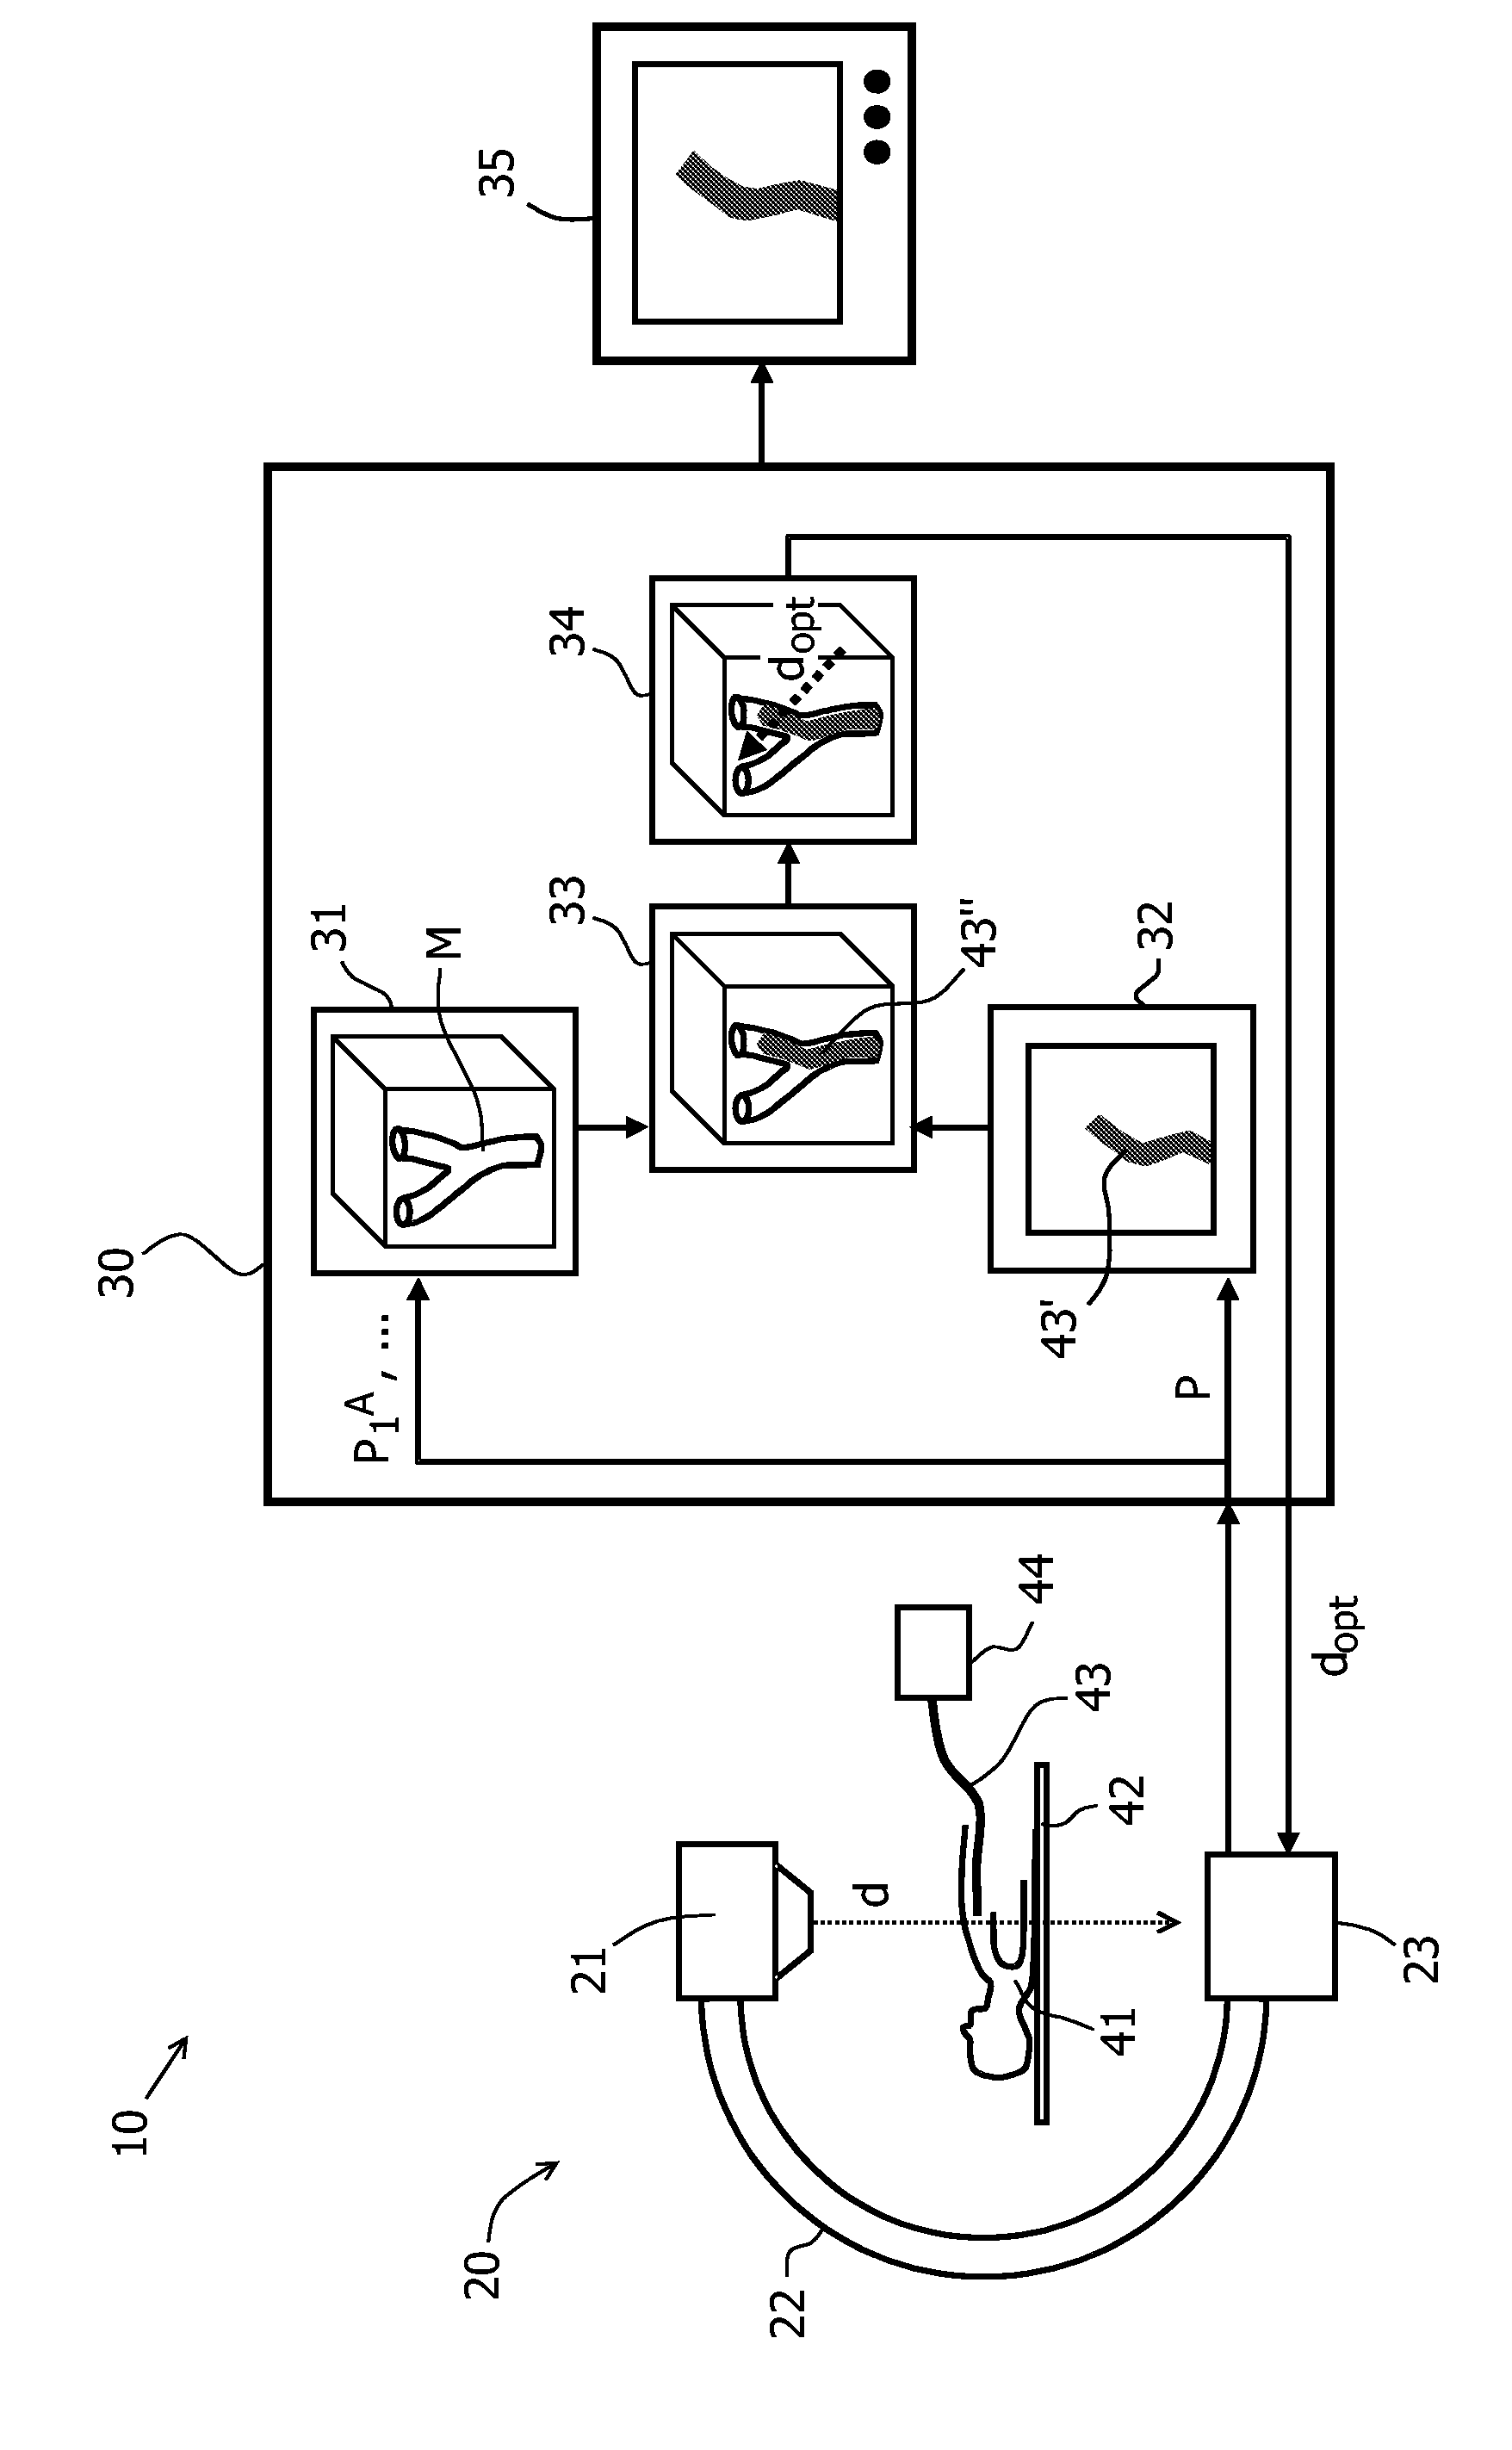 Method and apparatus for the observation of a catheter within a vessel system